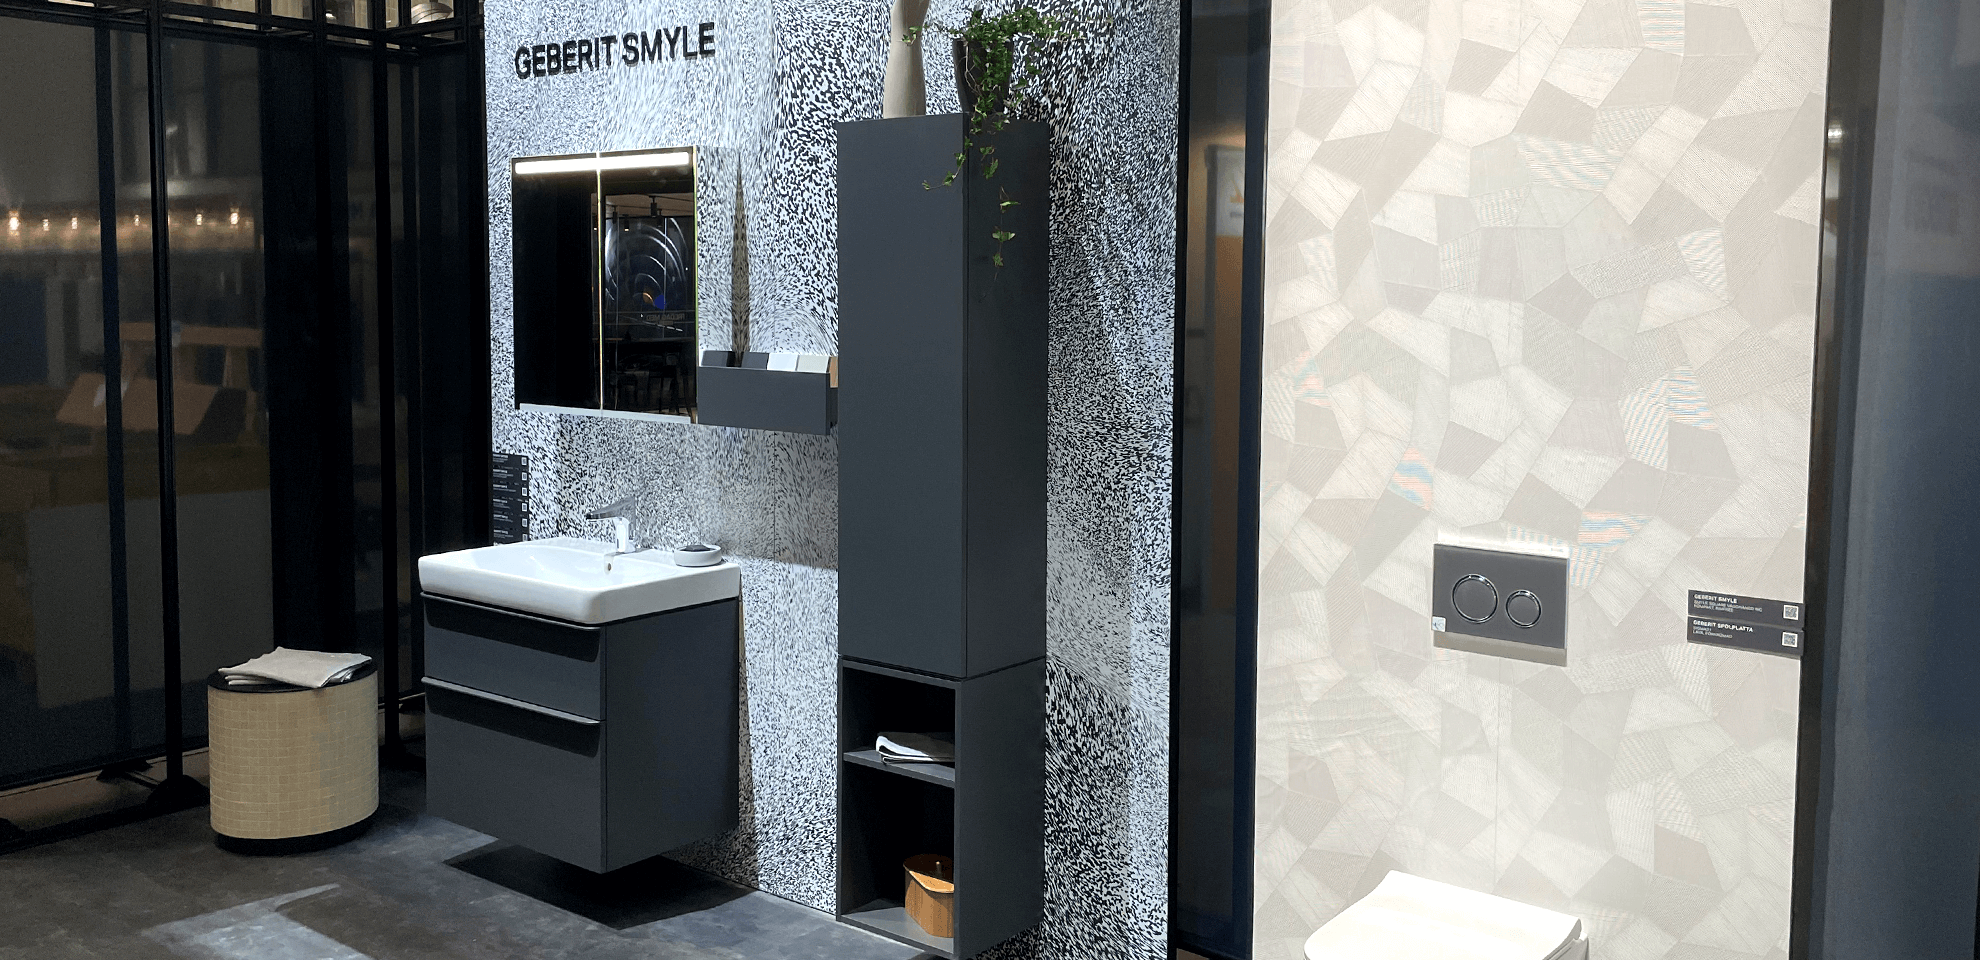 Display International built an exhibition stand for Geberit in Stockholm.